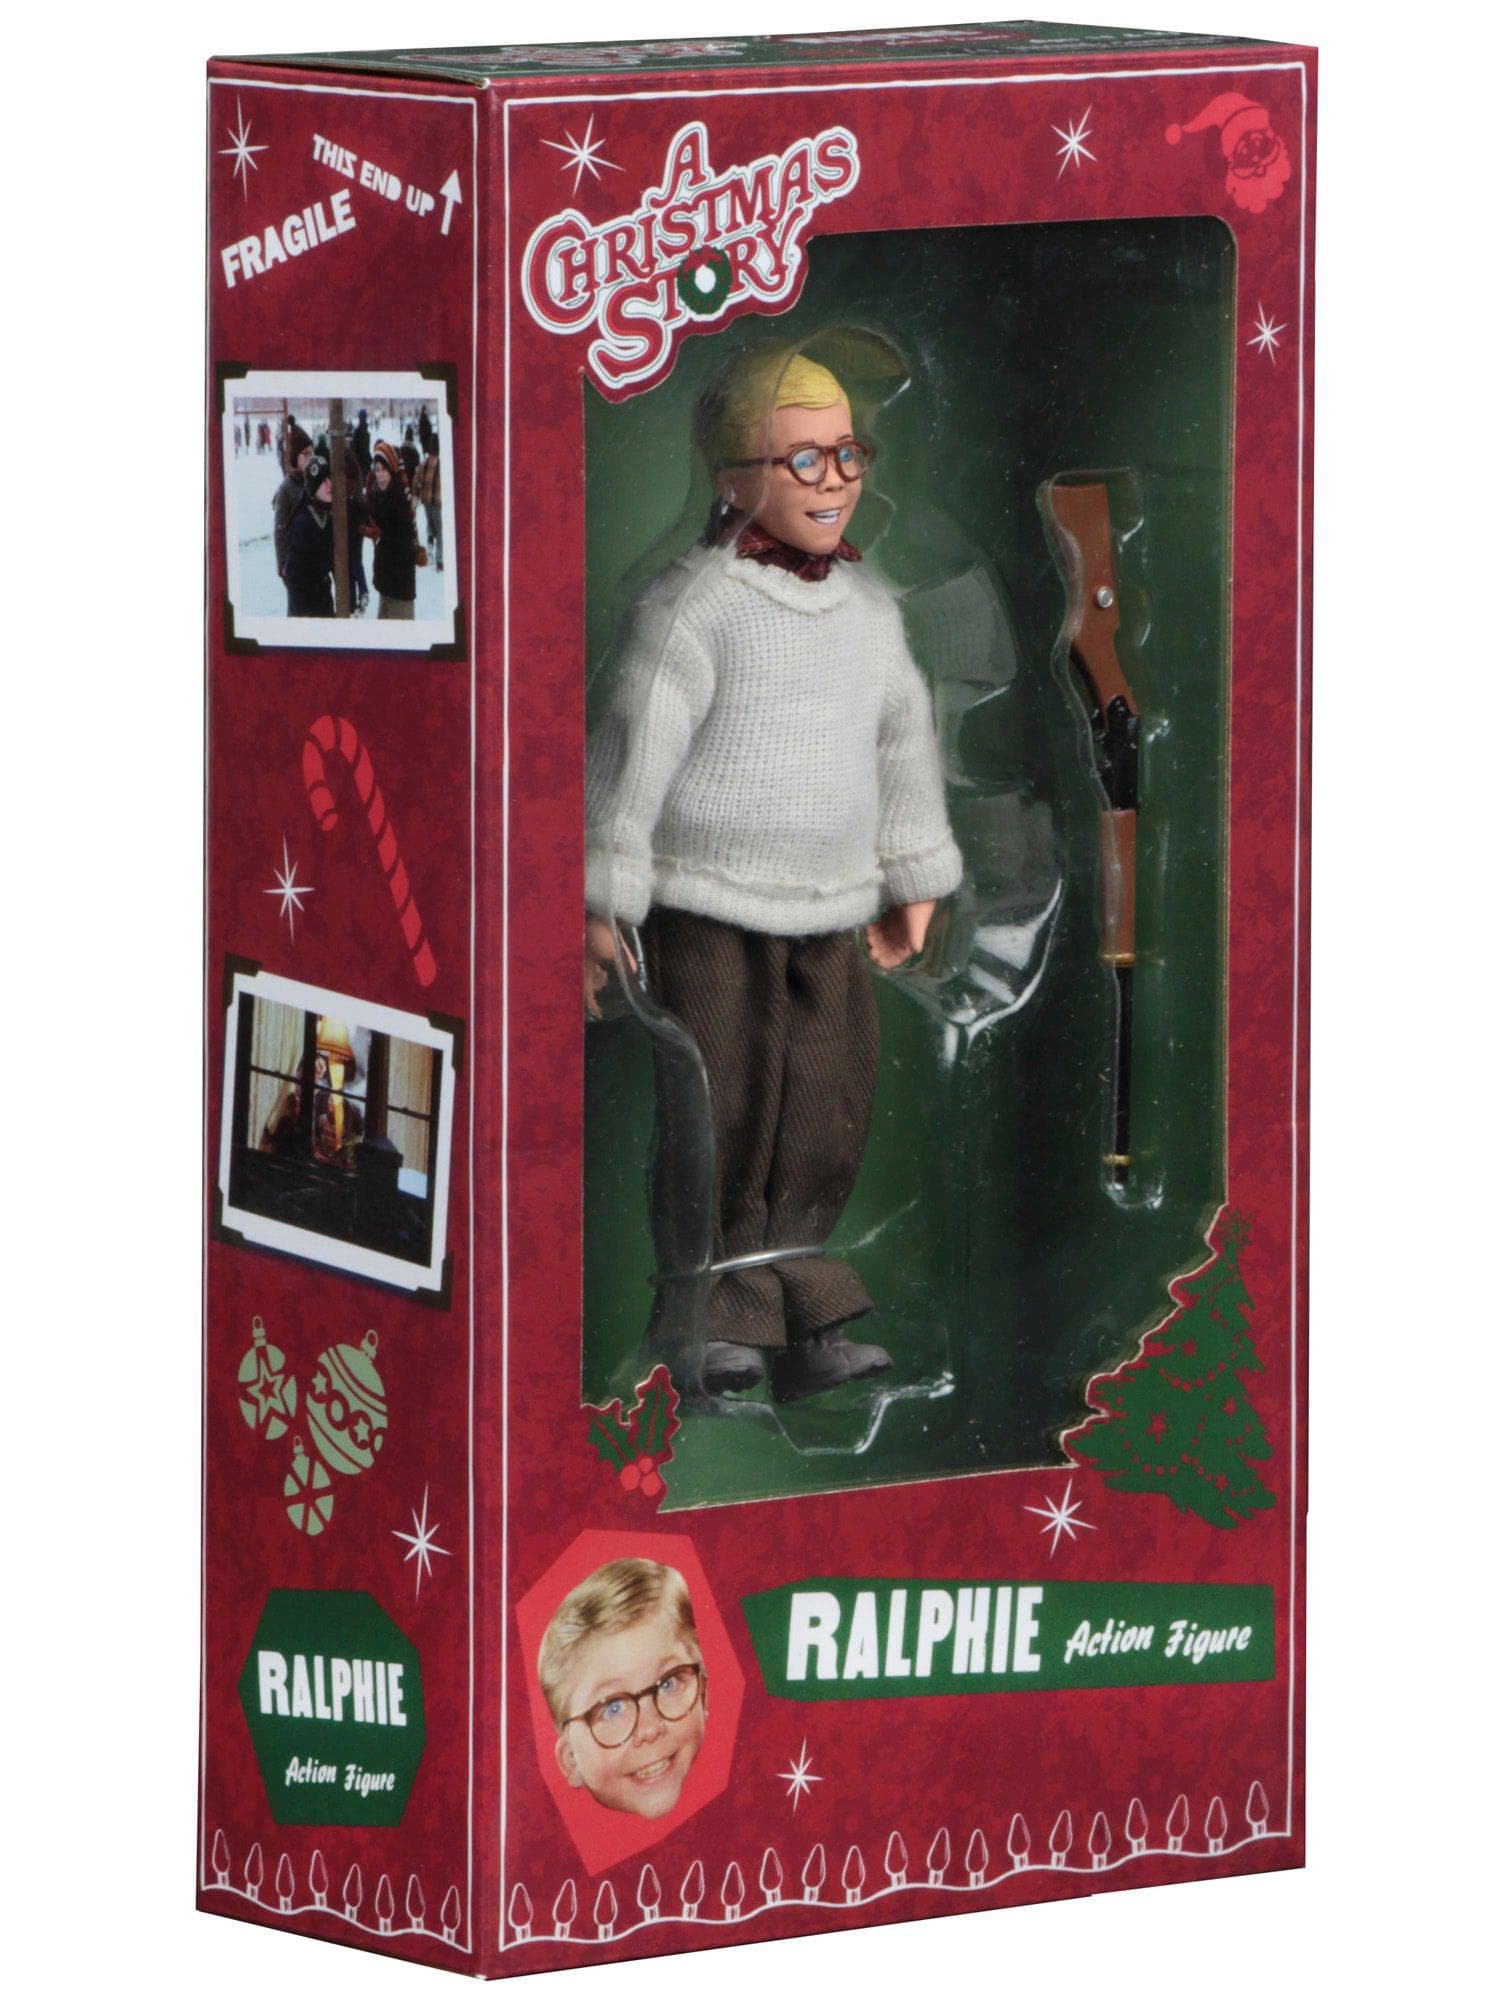 NECA - A Christmas Story - 8" Scale Clothed Action Figure - Ralphie - costumes.com